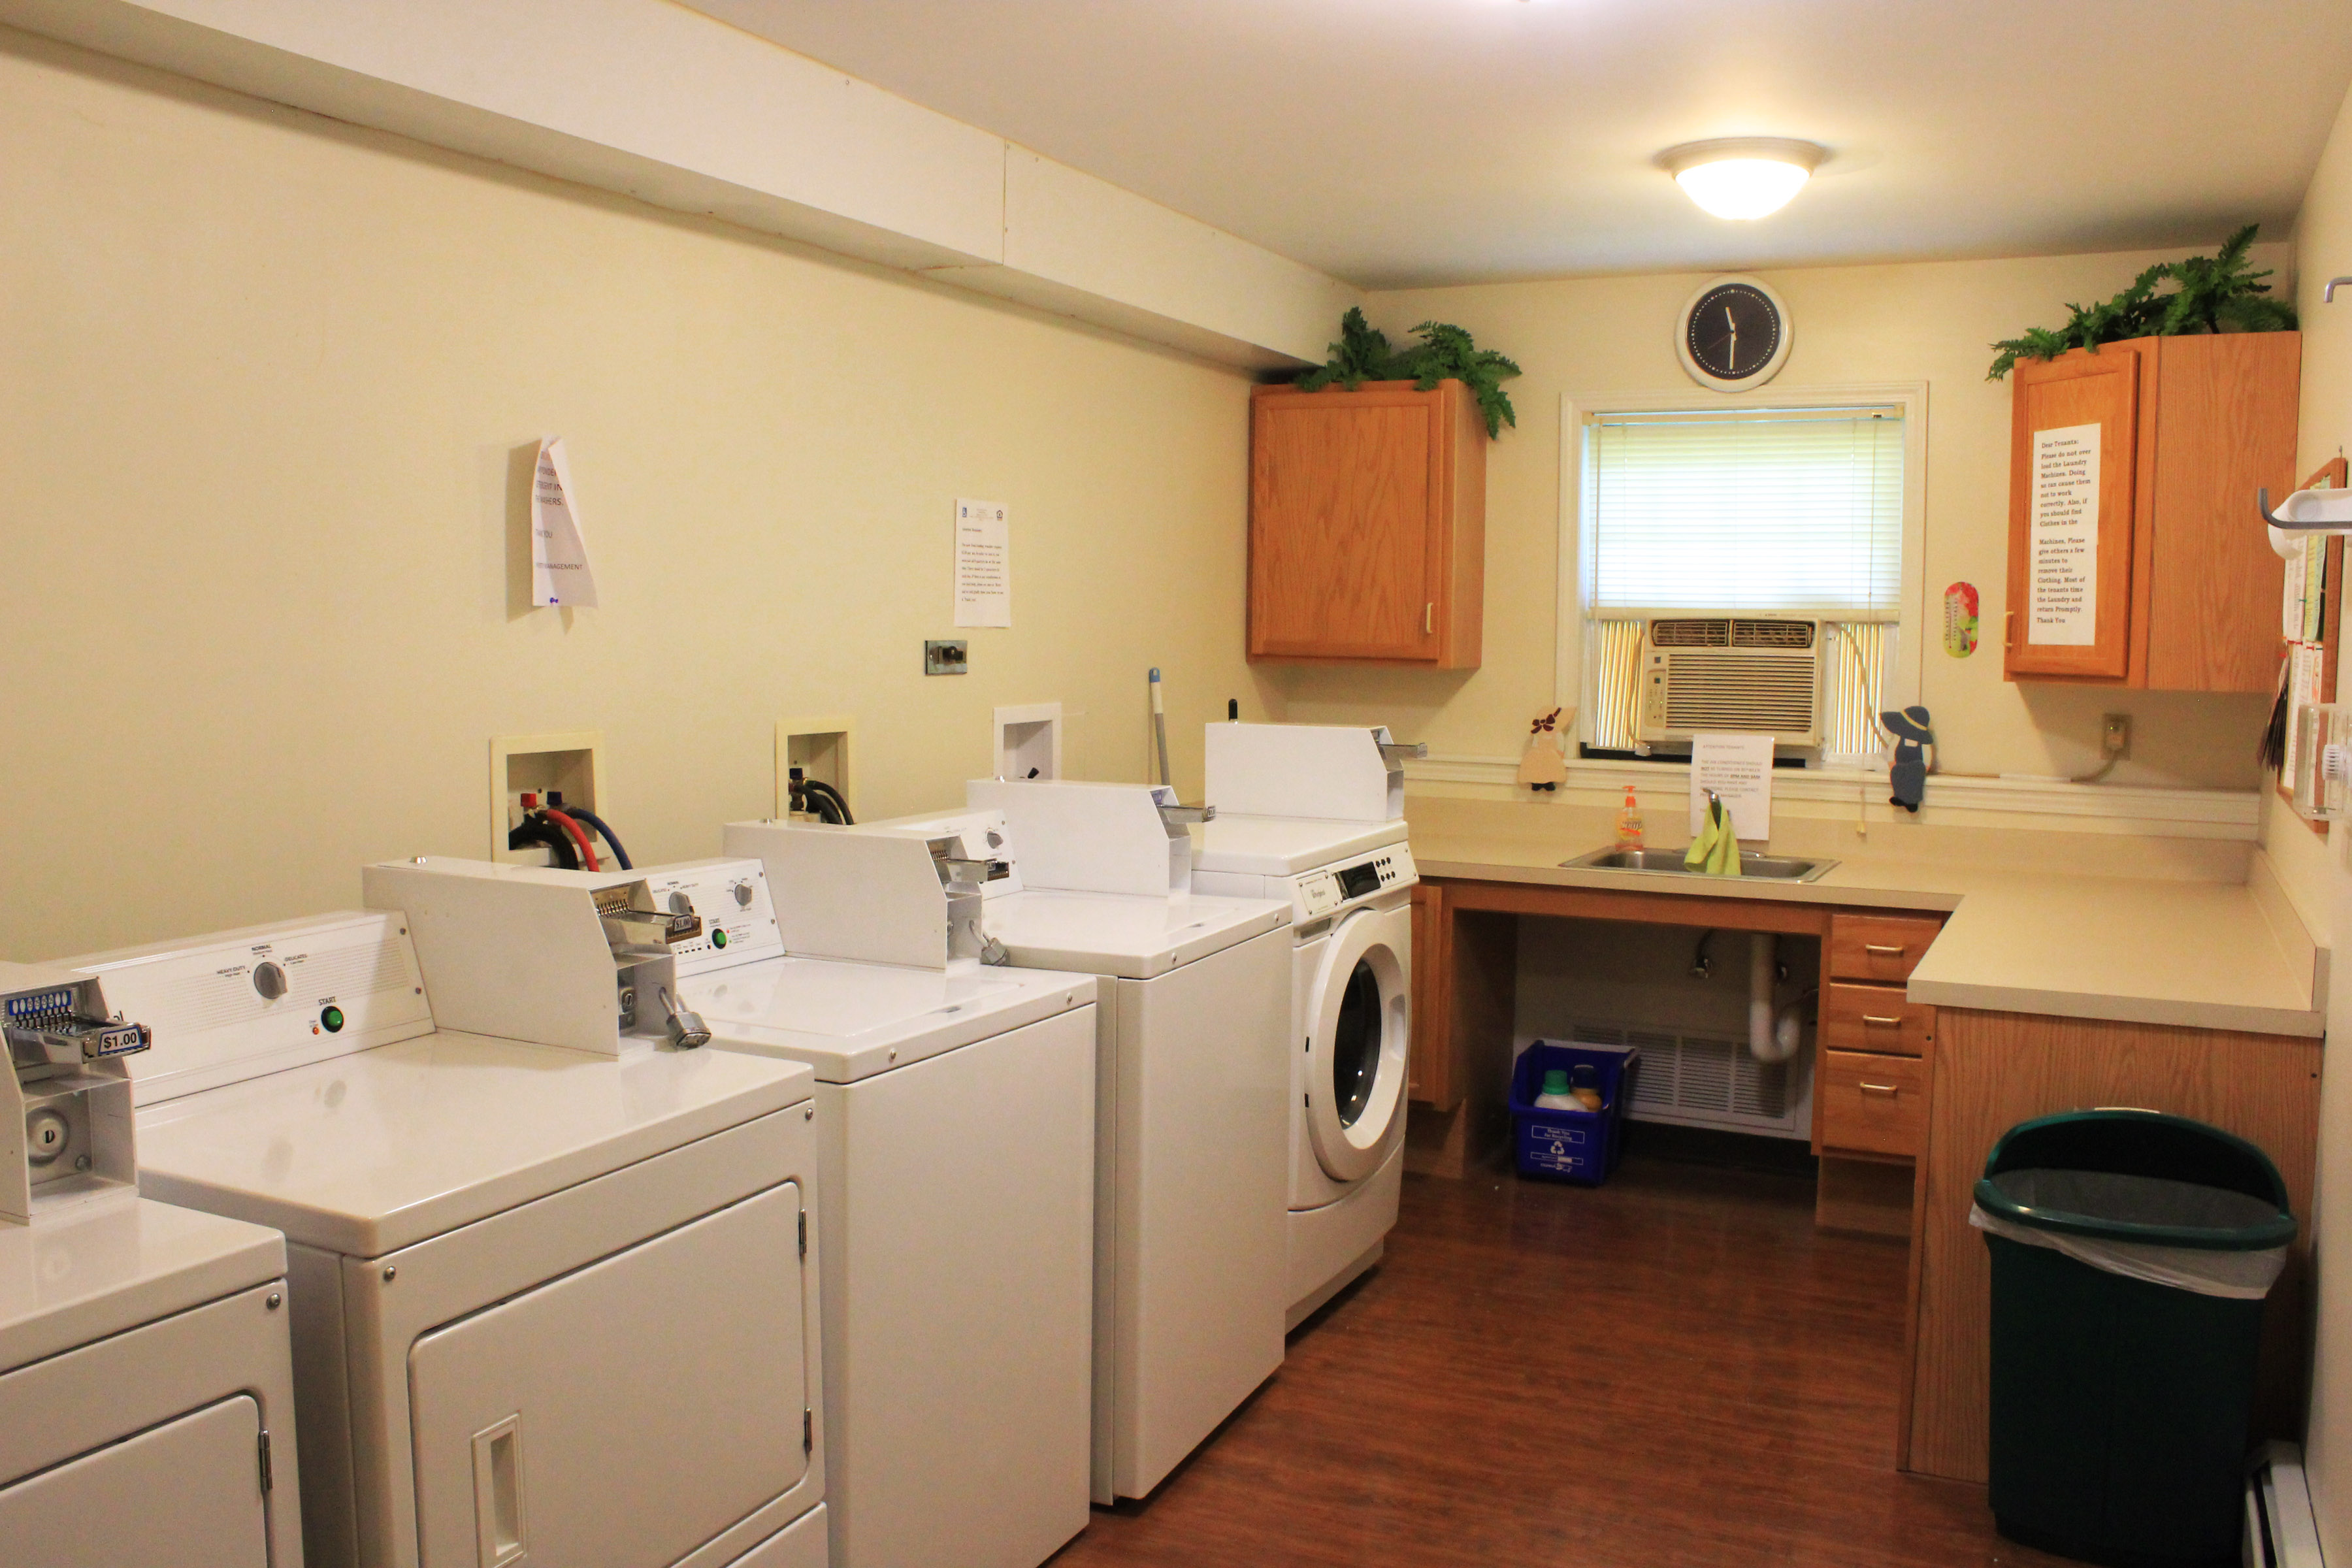 property management company client list syracuse ny community laundry image of upper crown landing apartments